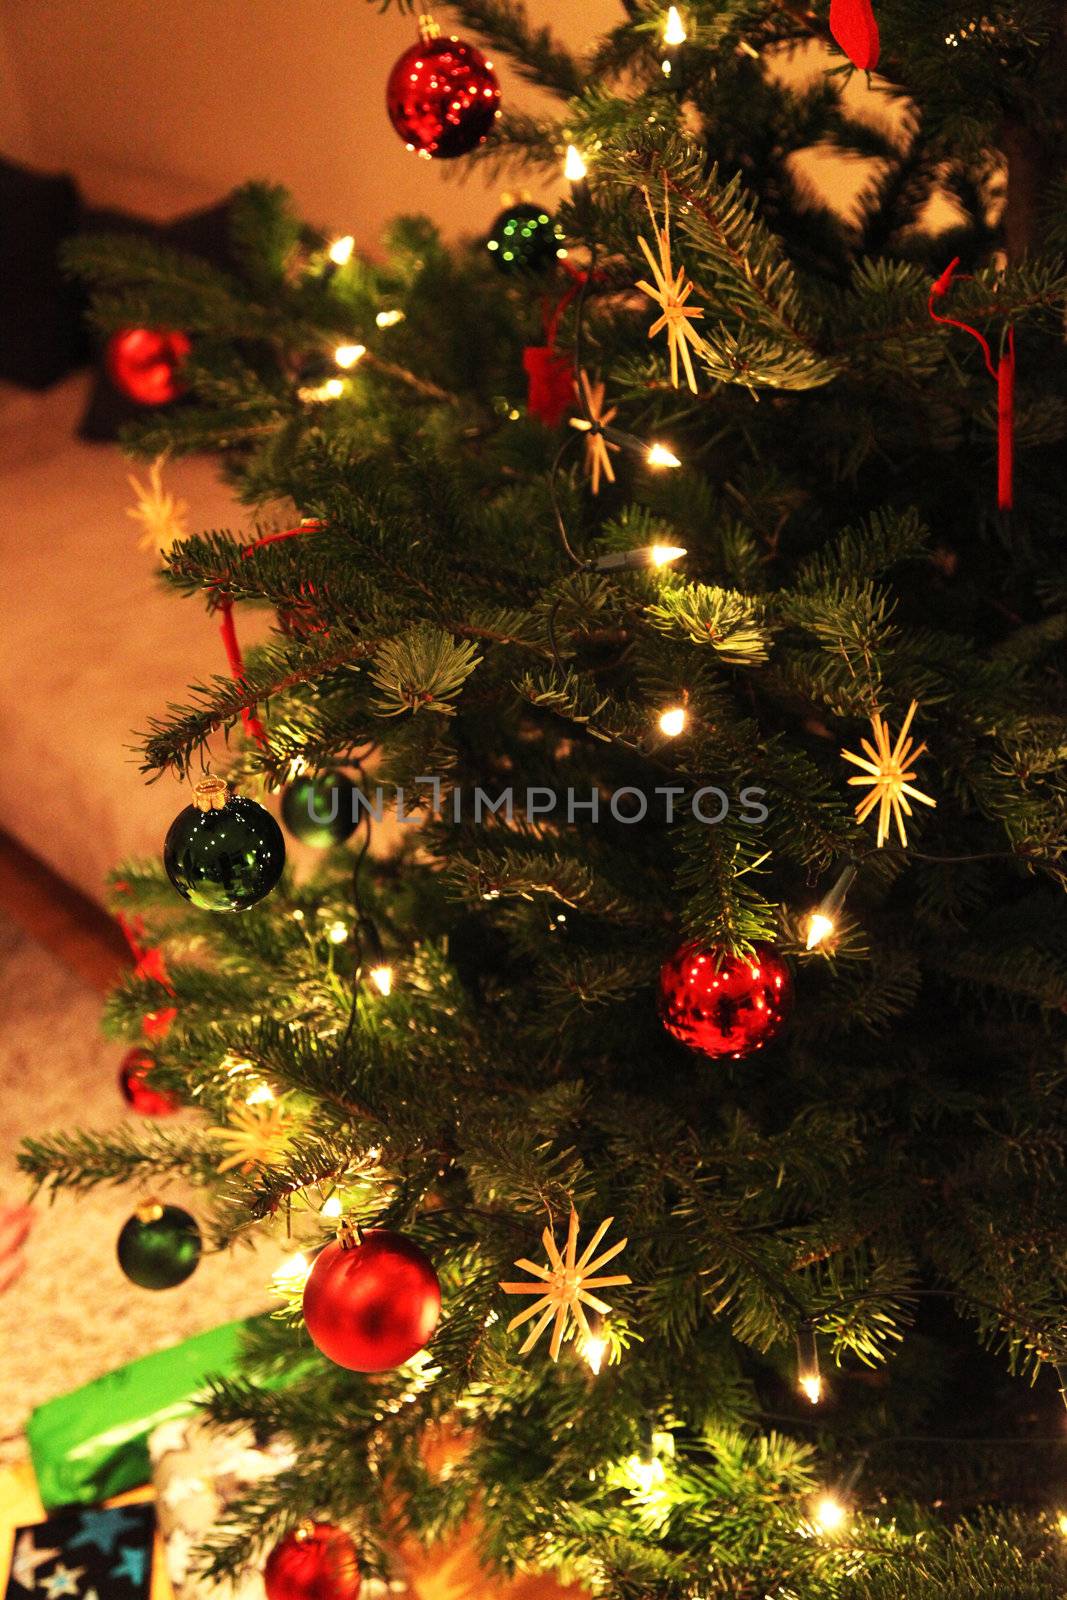 A festively decorated Christmas tree